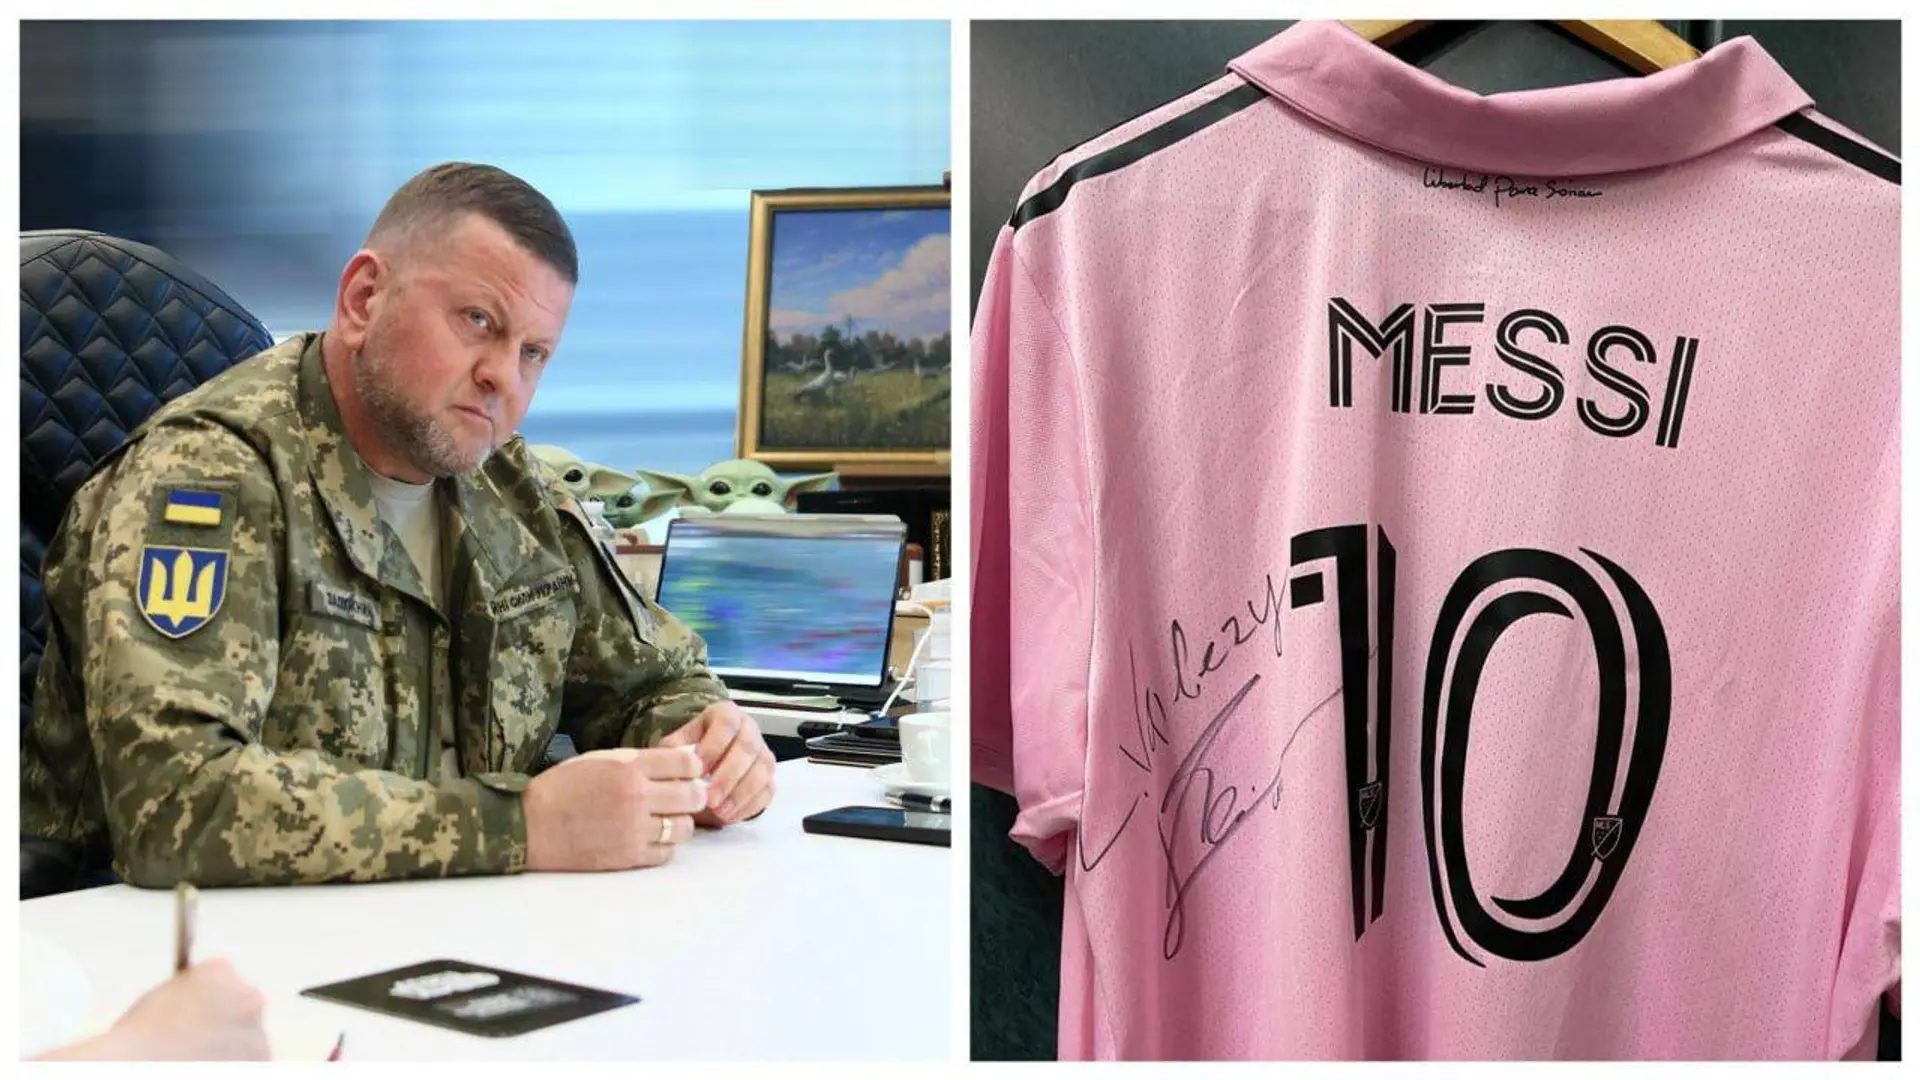 Lionel Messi gifts signed jersey to head of Ukraine army